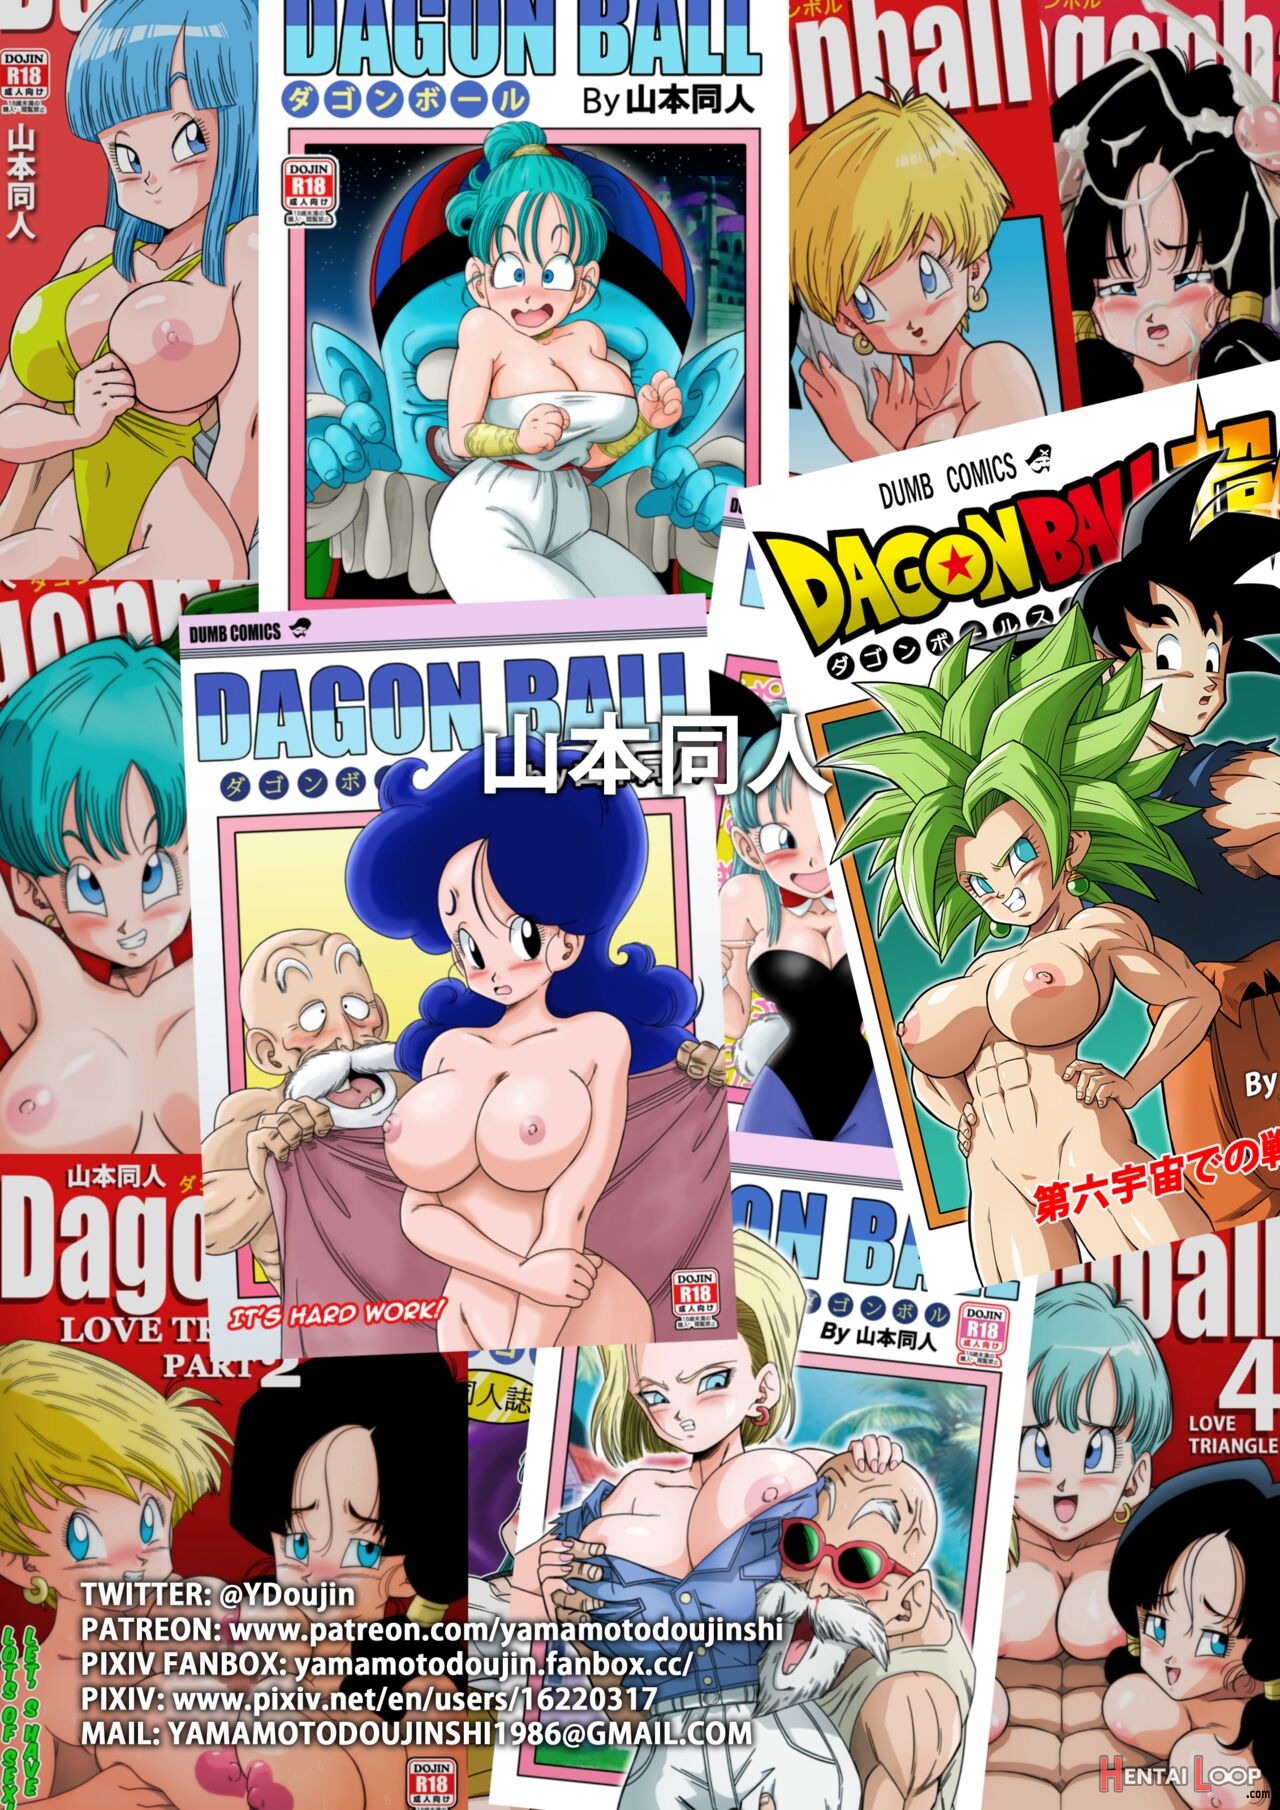 Dagon Ball - Bulma Meets Mr.popo - Sex Inside The Mysterious Spaceship! page 24